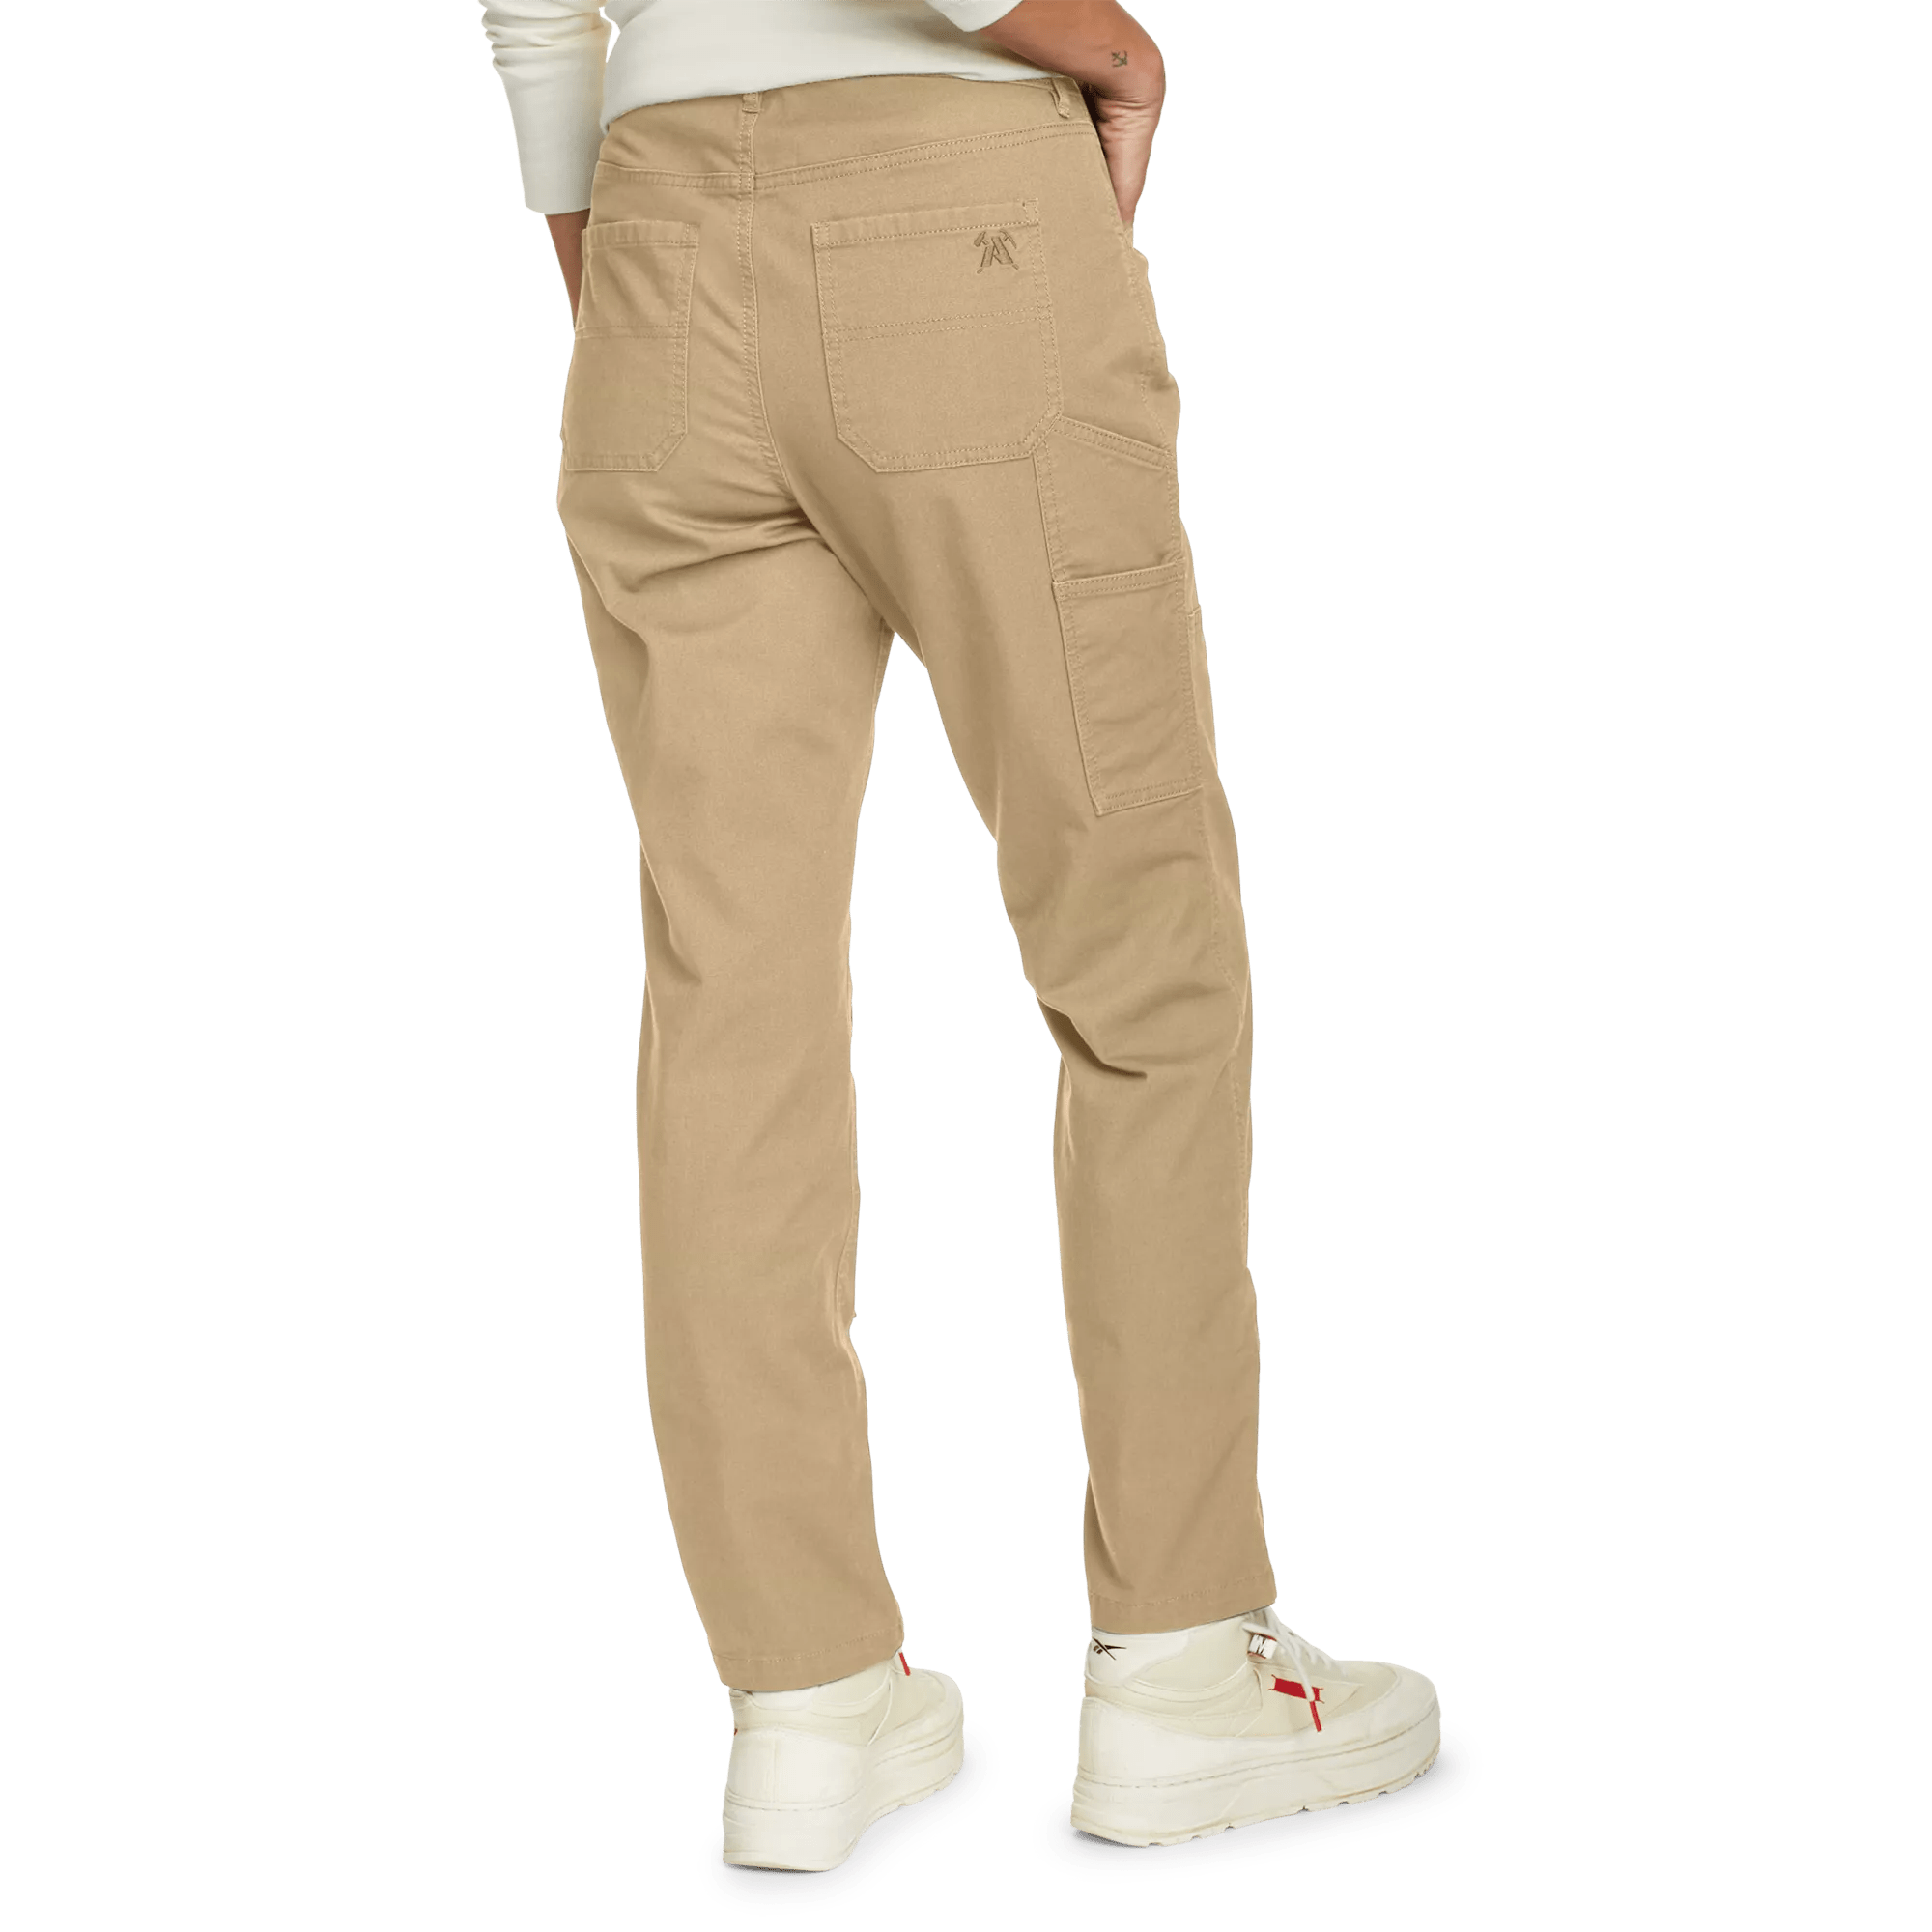 Mountain Ops Canvas Pants